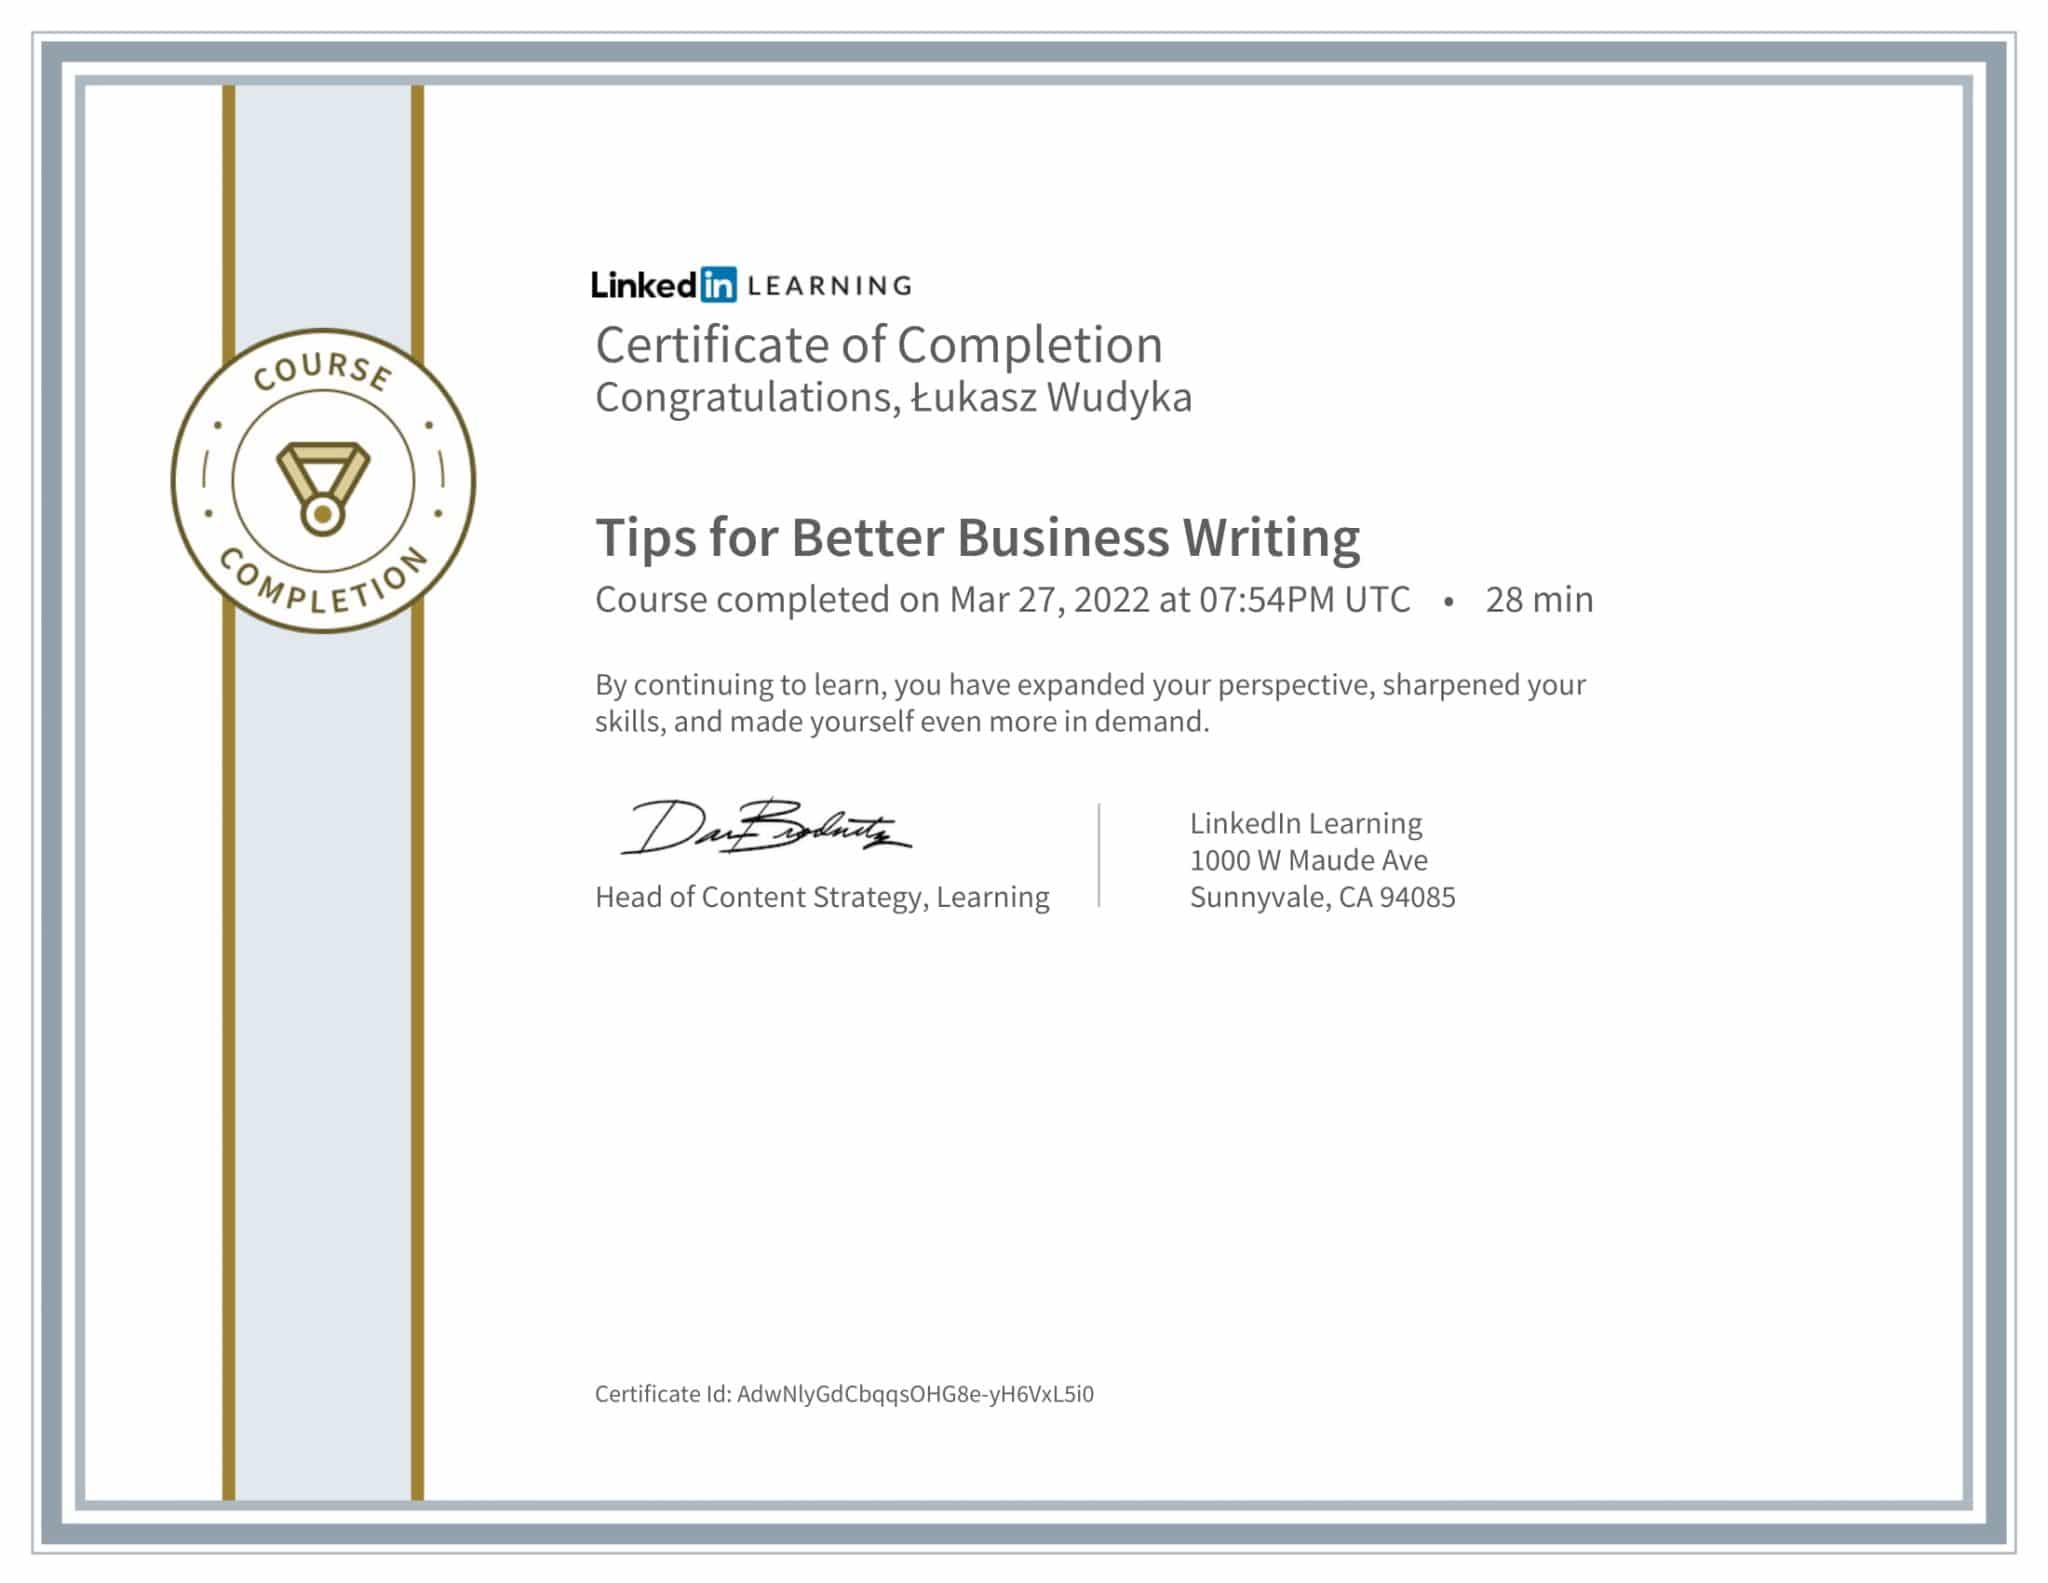 CertificateOfCompletion_Tips for Better Business Writing-1